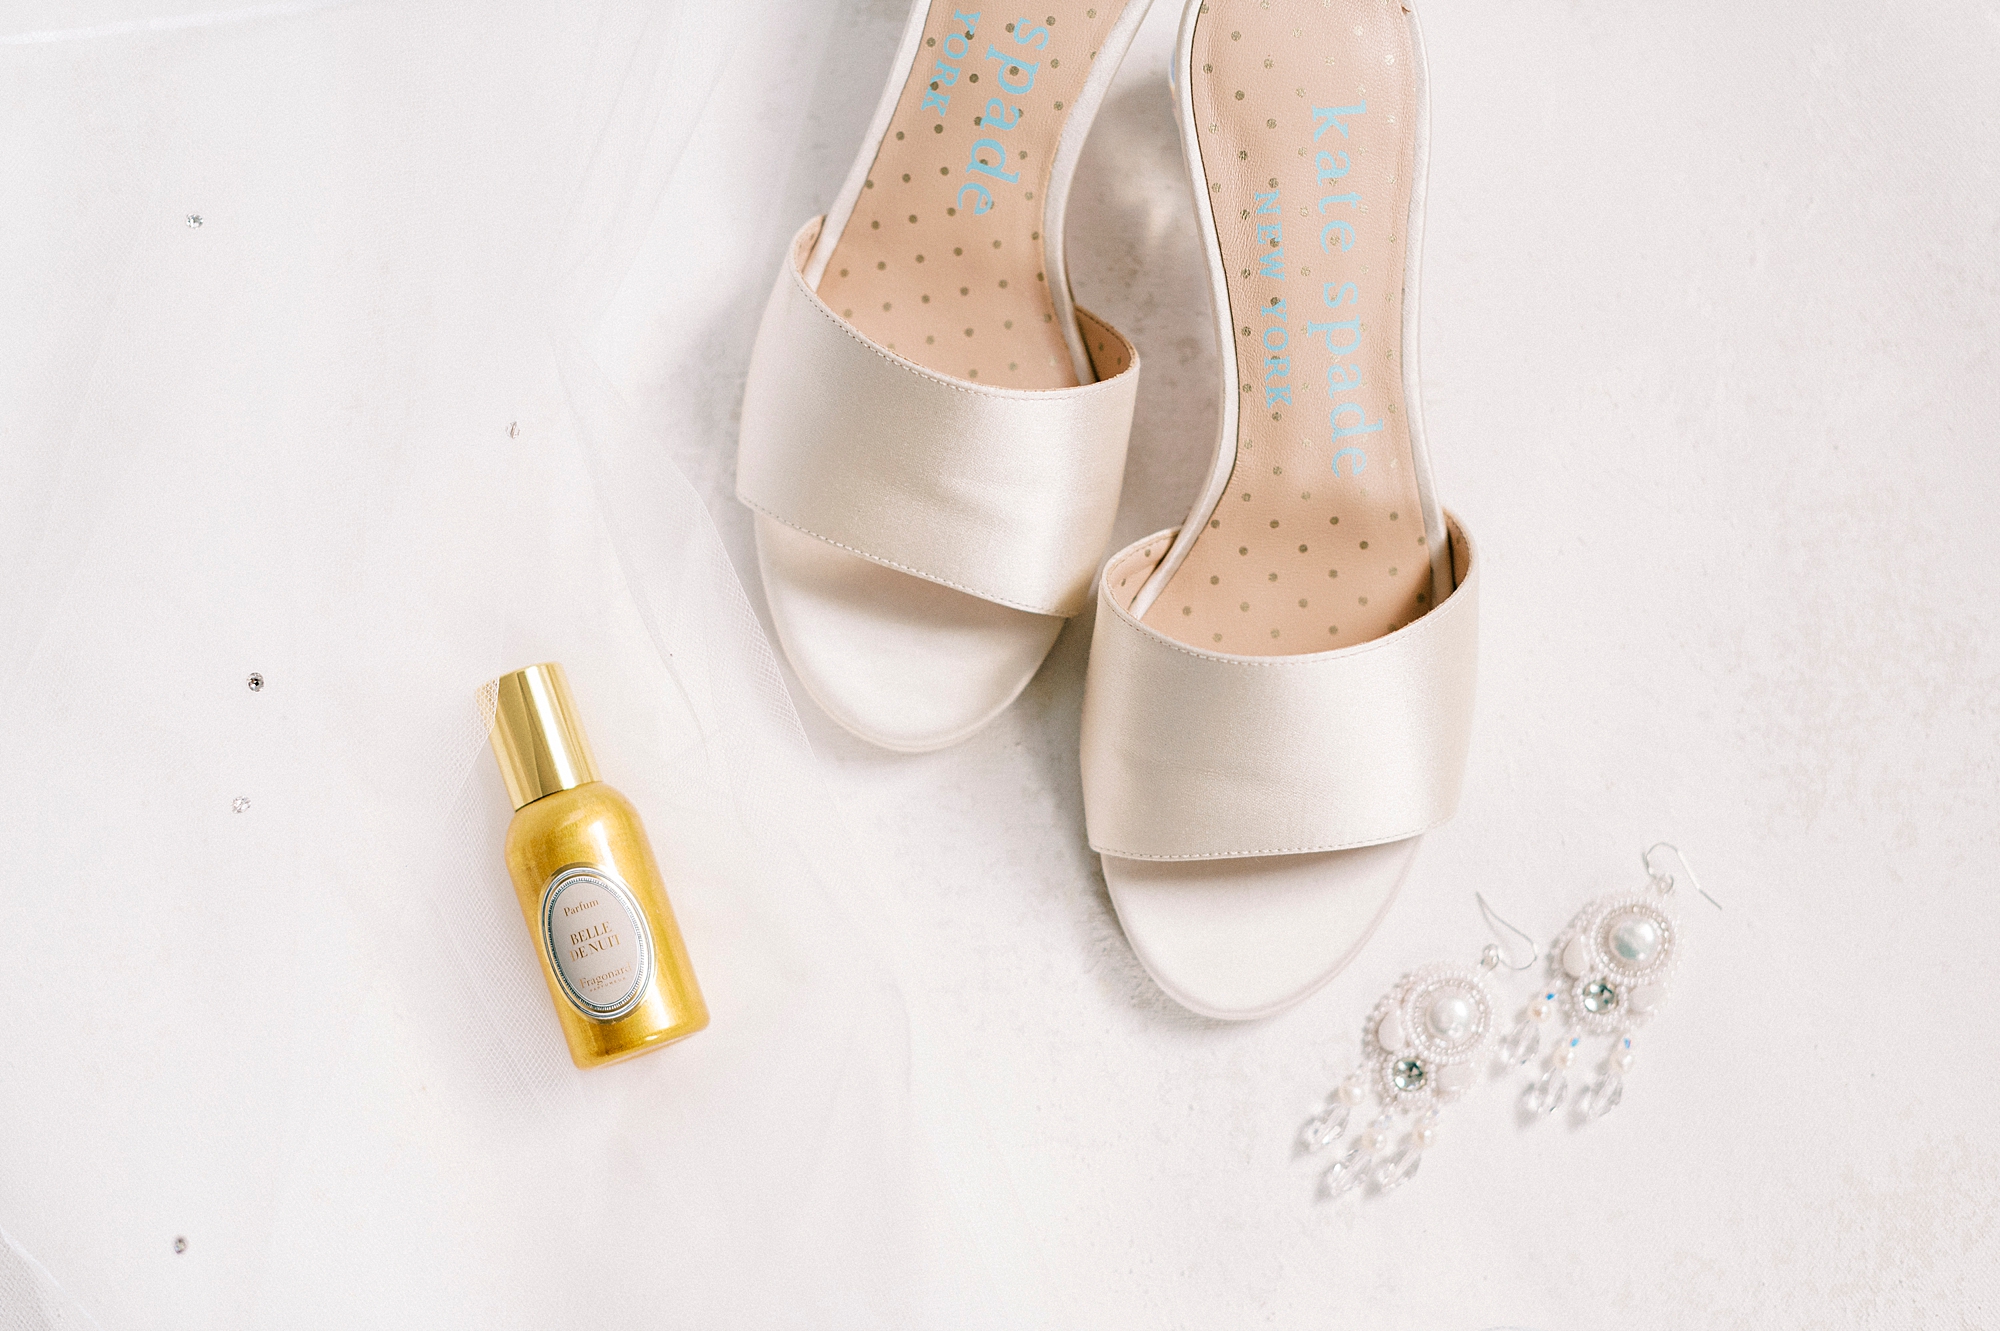 bride's ivory shoes and perfume bottle